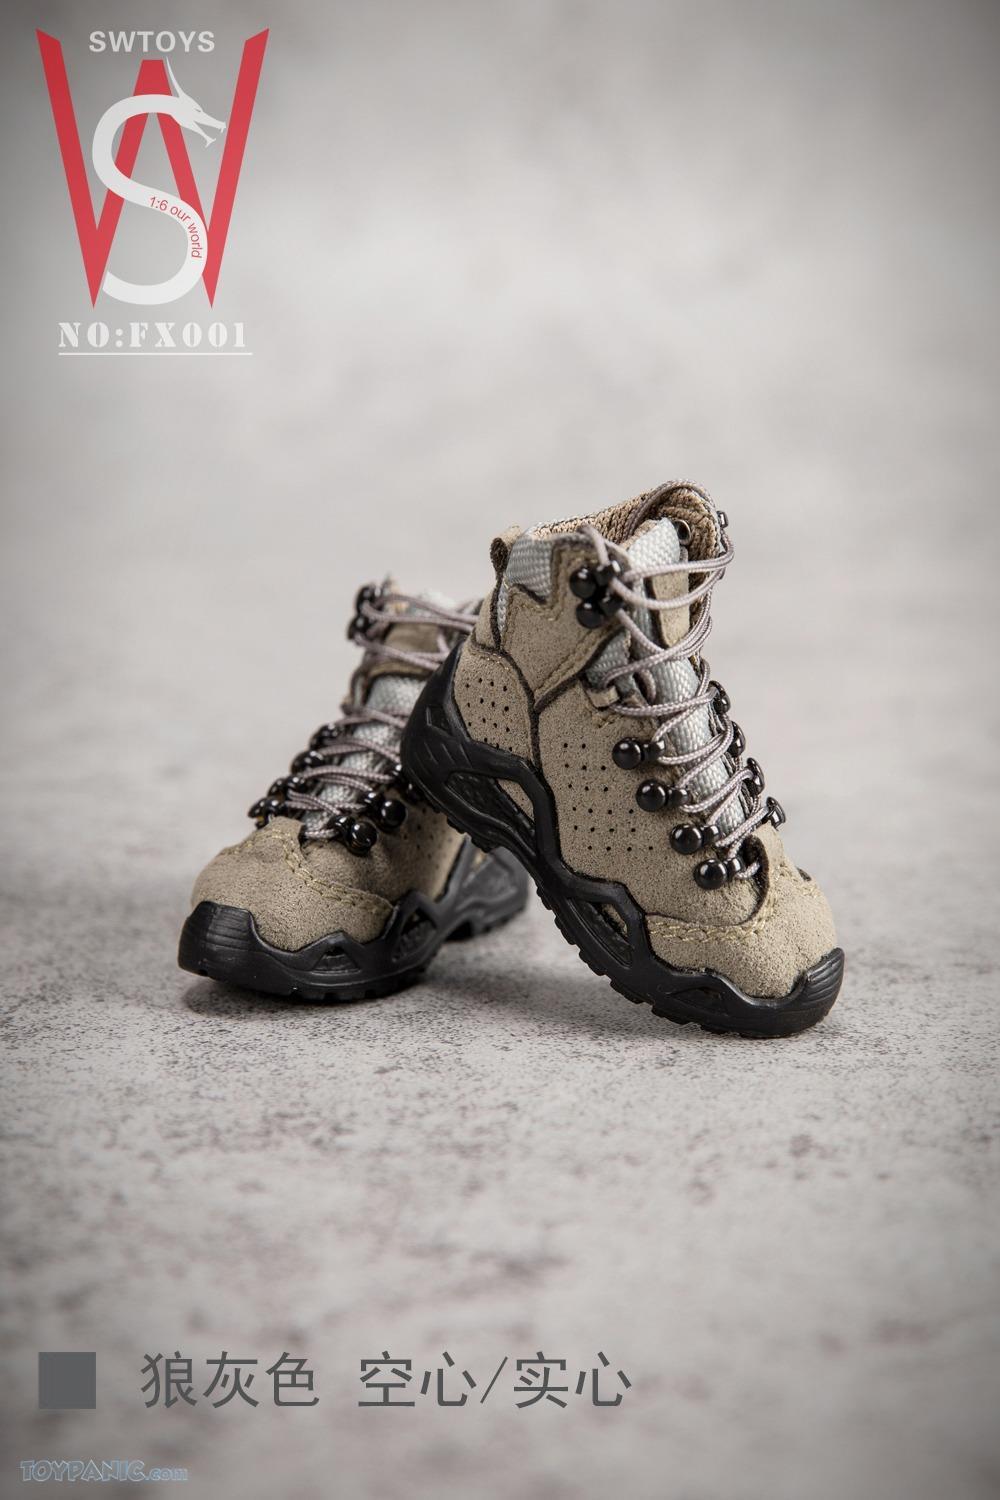 NEW PRODUCT: SWToys: Men's Tactical Military Boots (Hollow) (4 colors) 28820210